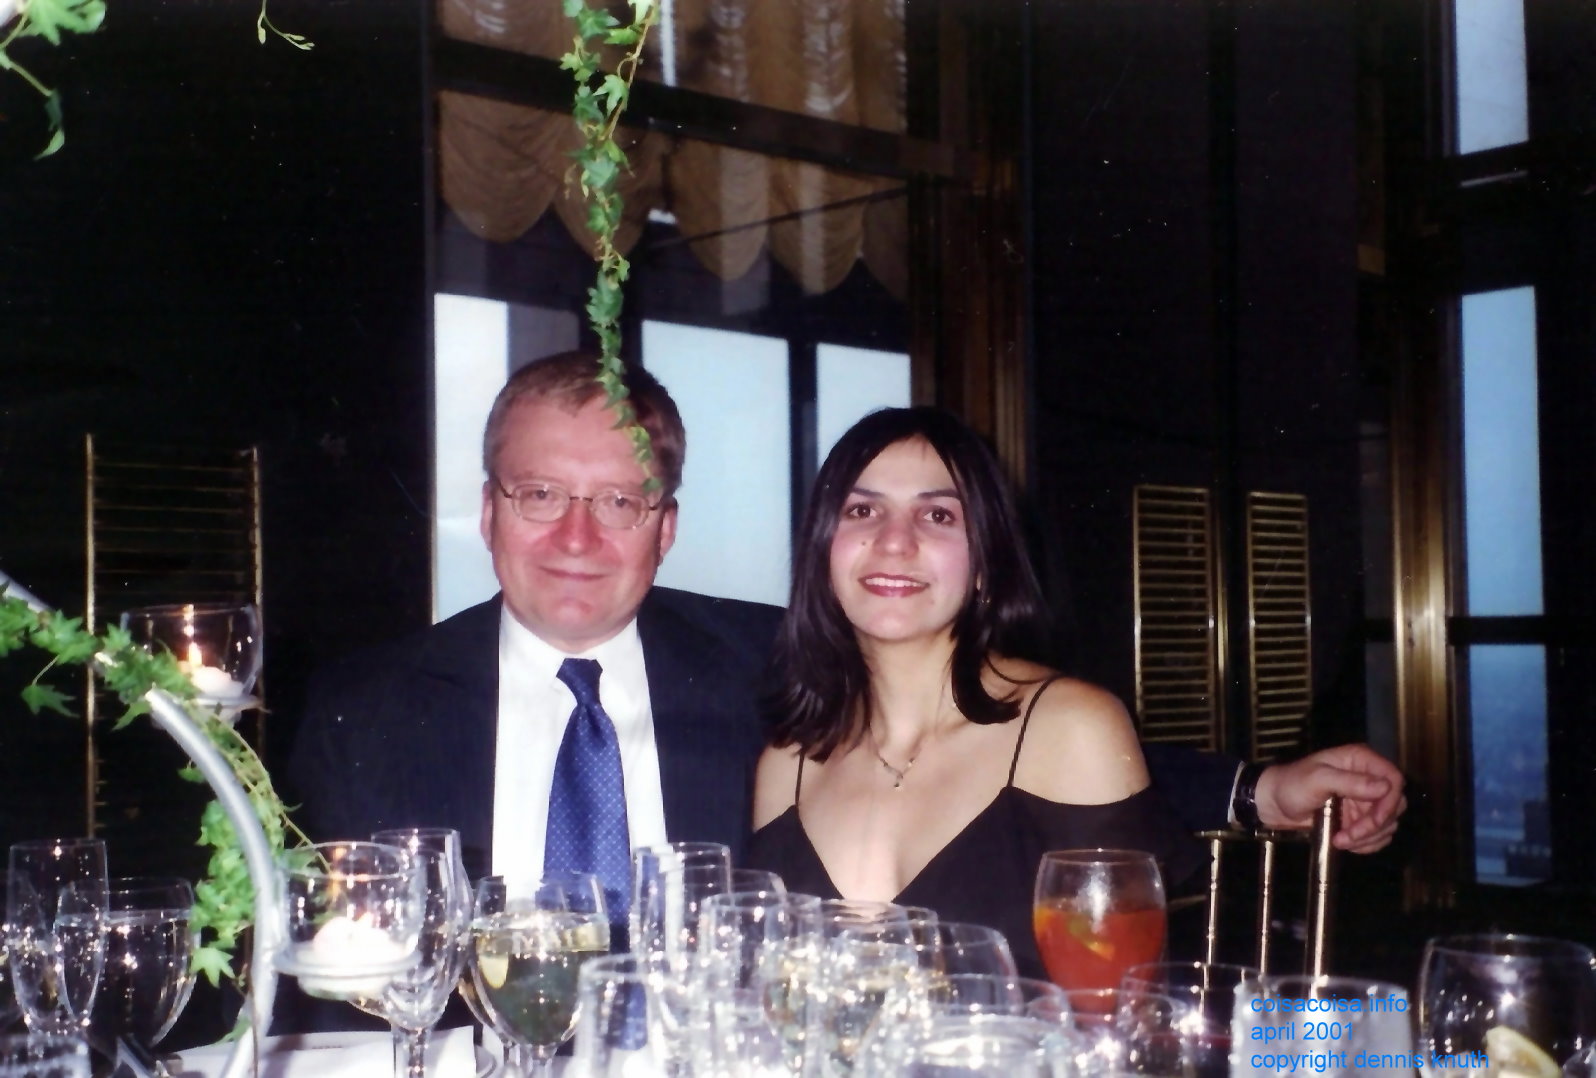 Dennis Knuth and Silesia at Robert and Priscilla's Wedding